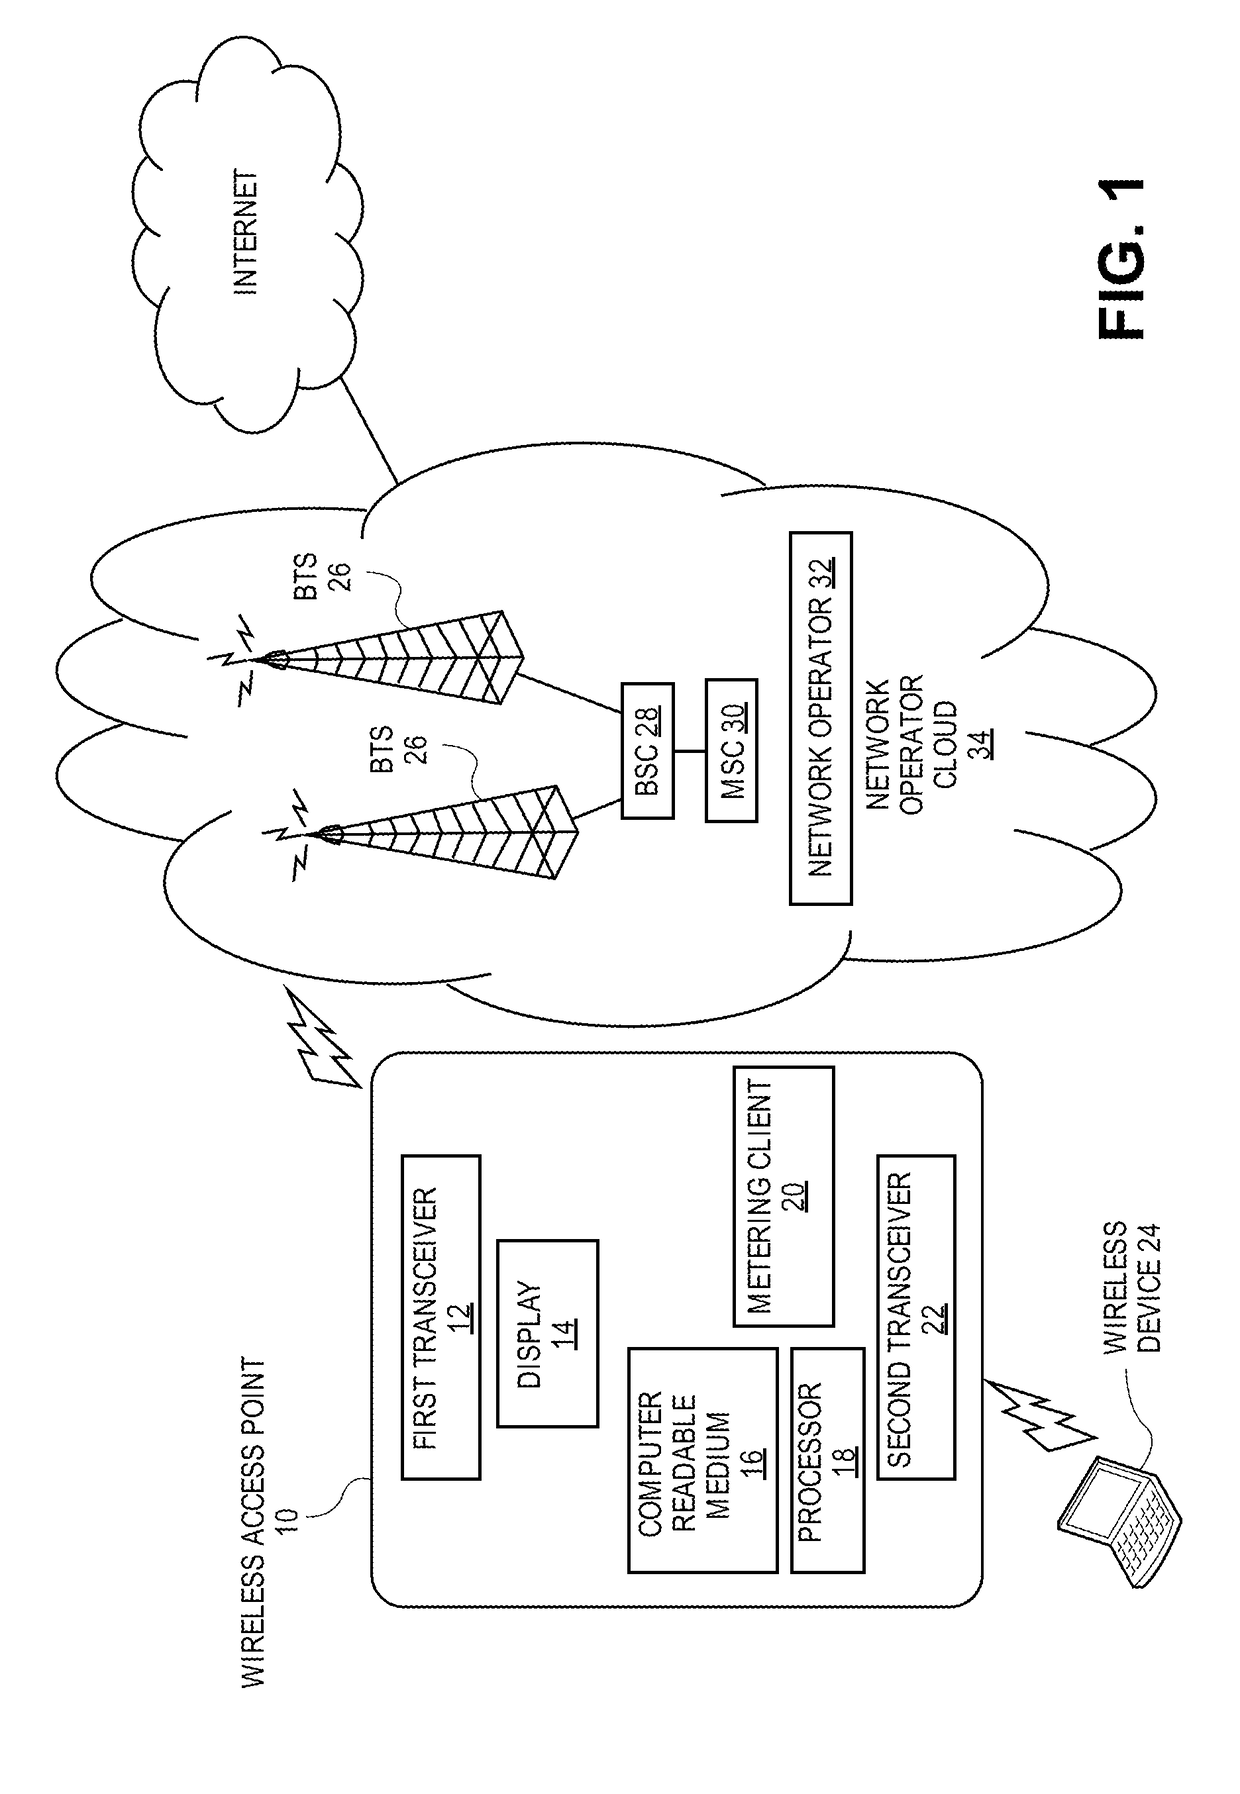 Wireless access point having metering capability and metering display